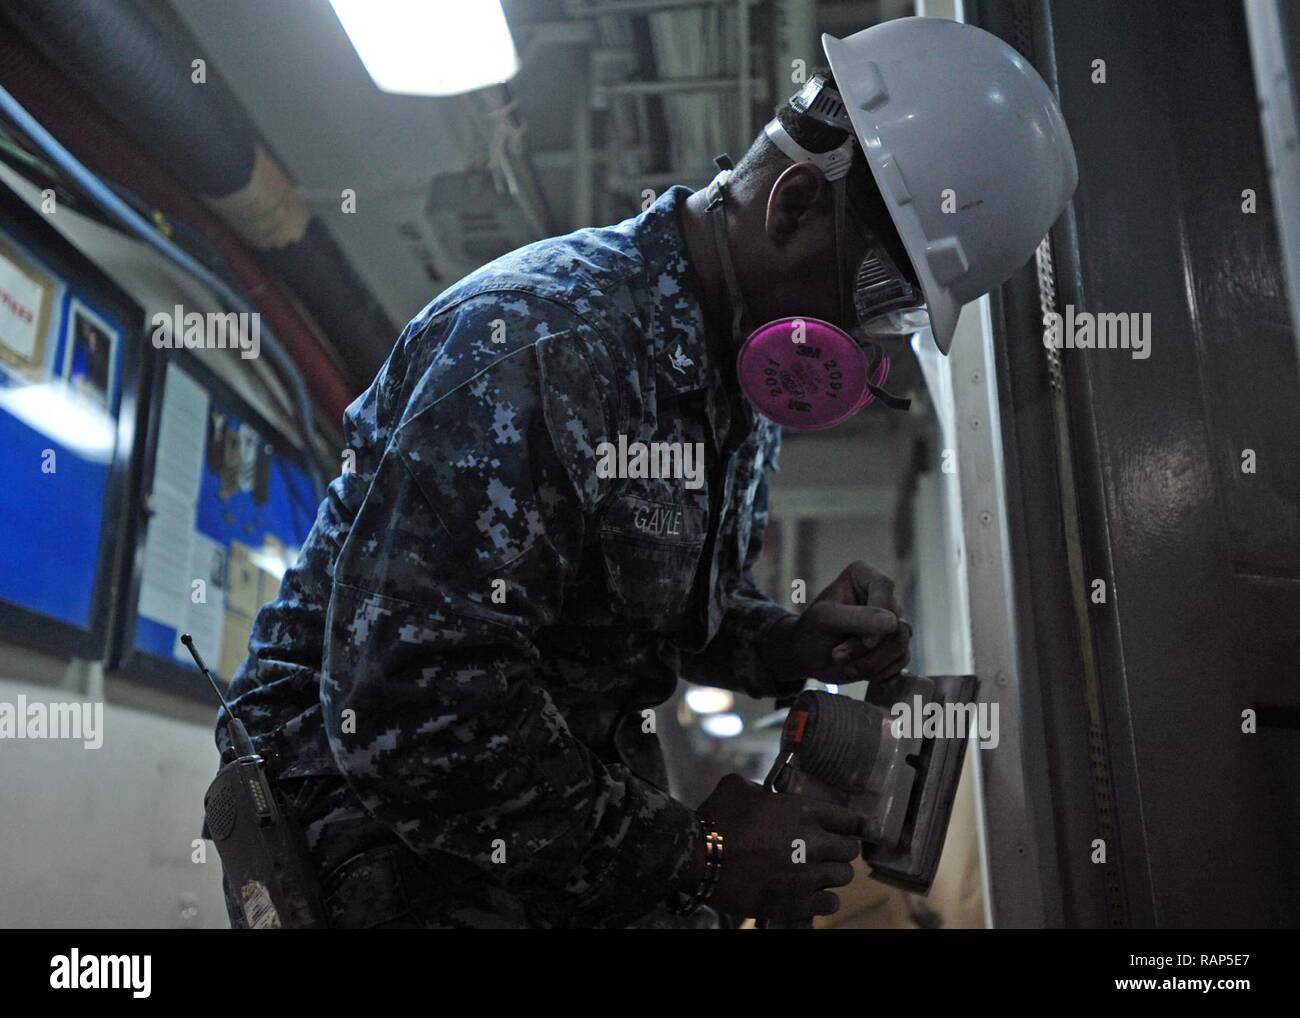 YOKOSUKA, Japan (Feb. 22, 2017) - Hospital Corpsman 3rd Class Patrick Gayle from Jacksonville, Fla., attached to the U.S. 7th Fleet flagship USS Blue Ridge (LCC 19), sands a door frame in the ship's medical waiting area. Blue Ridge is in an extensive maintenance period in order to modernize the ship to continue to serve as a robust communications platform in the U.S. 7th Fleet area of operations. Stock Photo